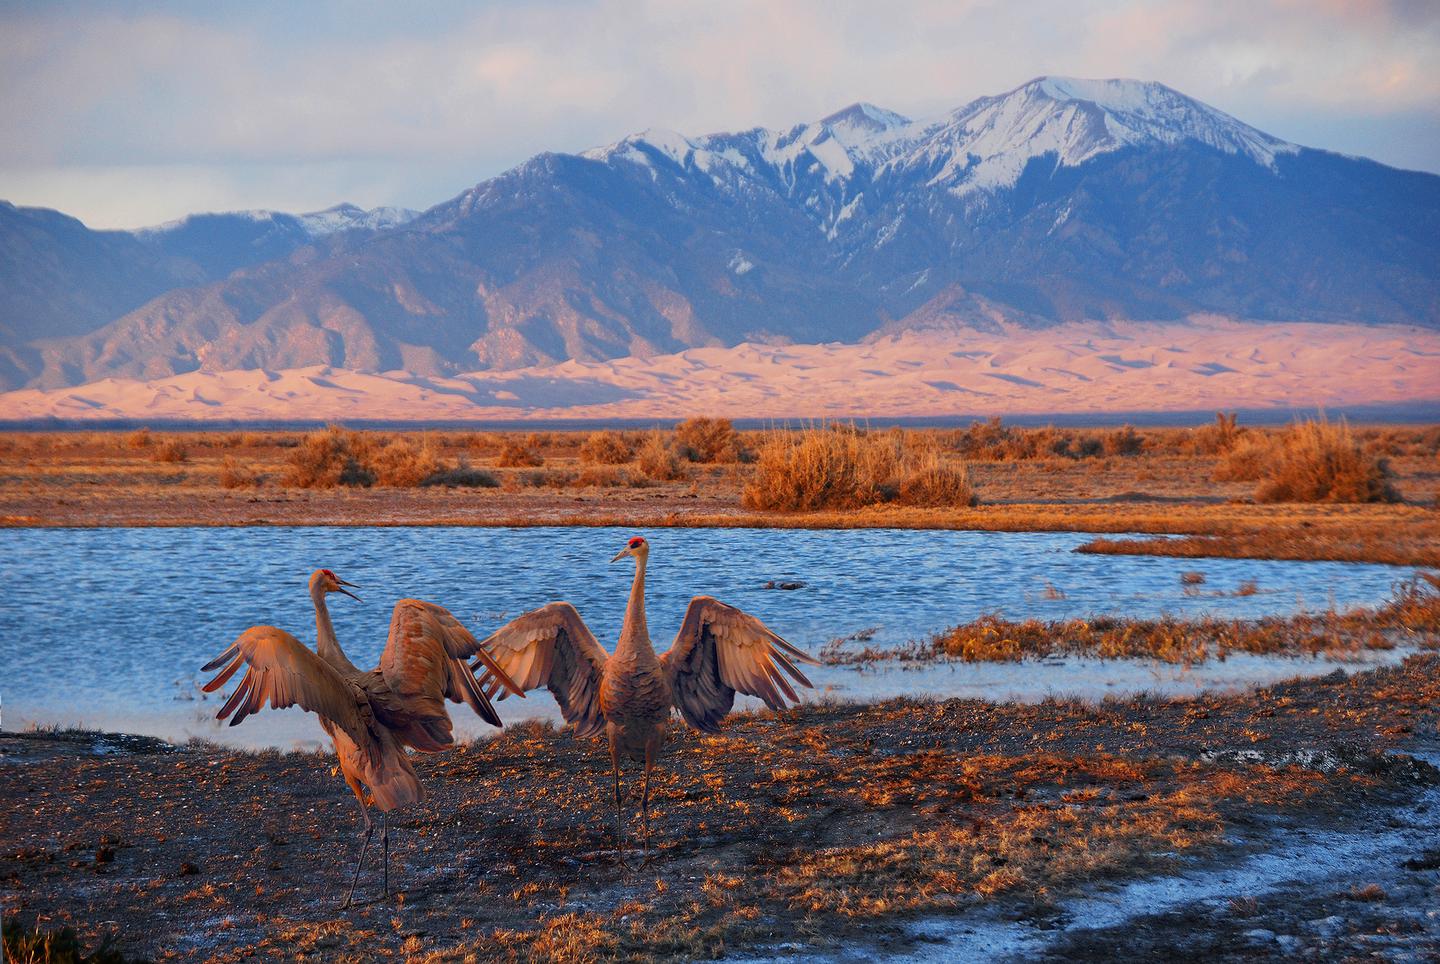 Sandhill Cranes Dancing, Dunes, and Mount HerardSandhill cranes spend part of the spring and fall in the San Luis Valley each year. Look for them in farm fields during daytime, then in wetlands from sunset to sunrise.  In spring, they dance to attract mates.